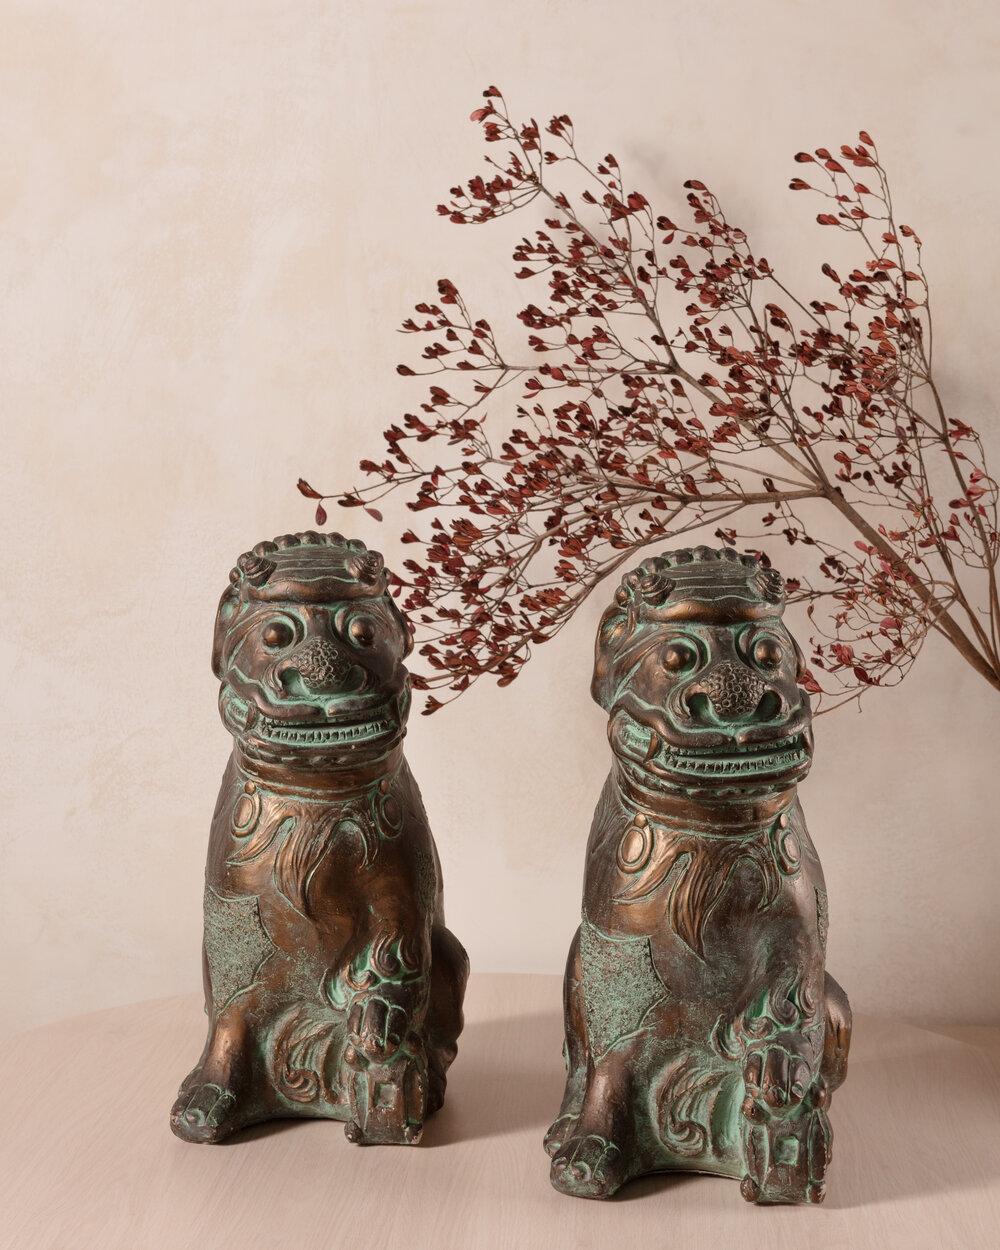 A substantial pair of 1970s plaster foo dogs sourced from a South Florida estate. Featuring fantastic details and a hand painted patina.